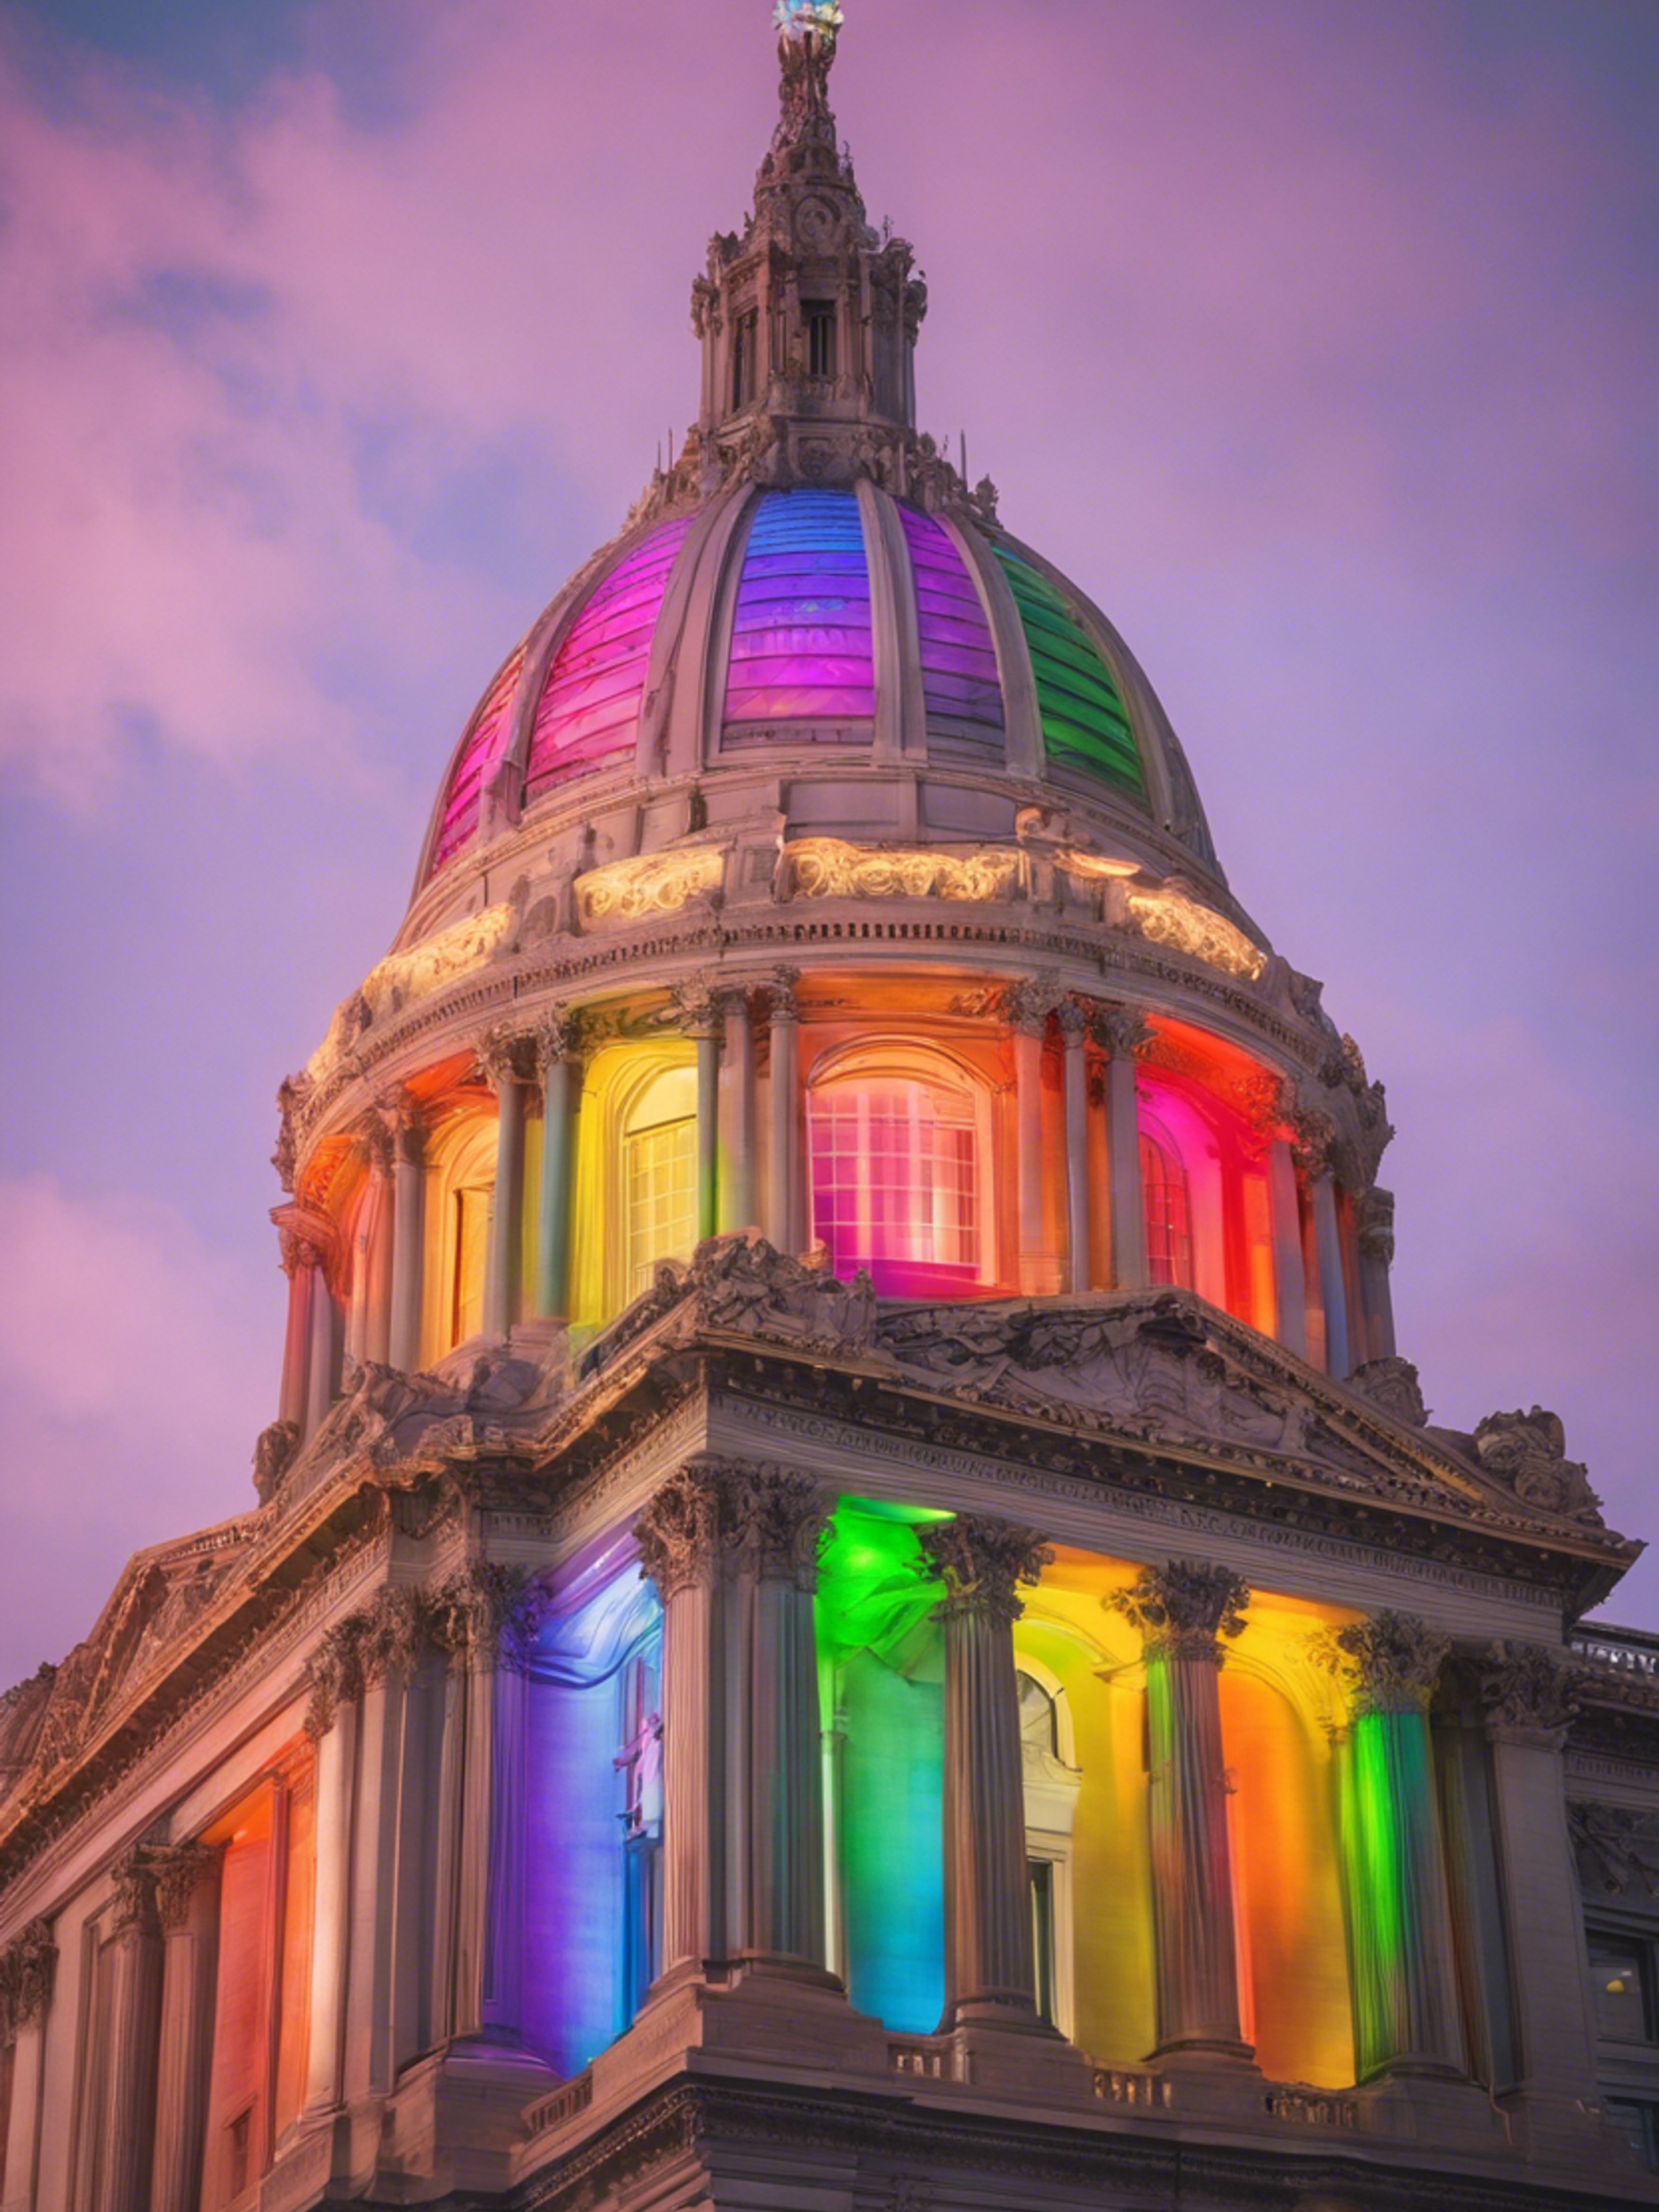 San Francisco's City Hall illuminated in rainbow colors in honor of Pride Month. Wallpaper[a01b5ed1867f4cff8c6b]